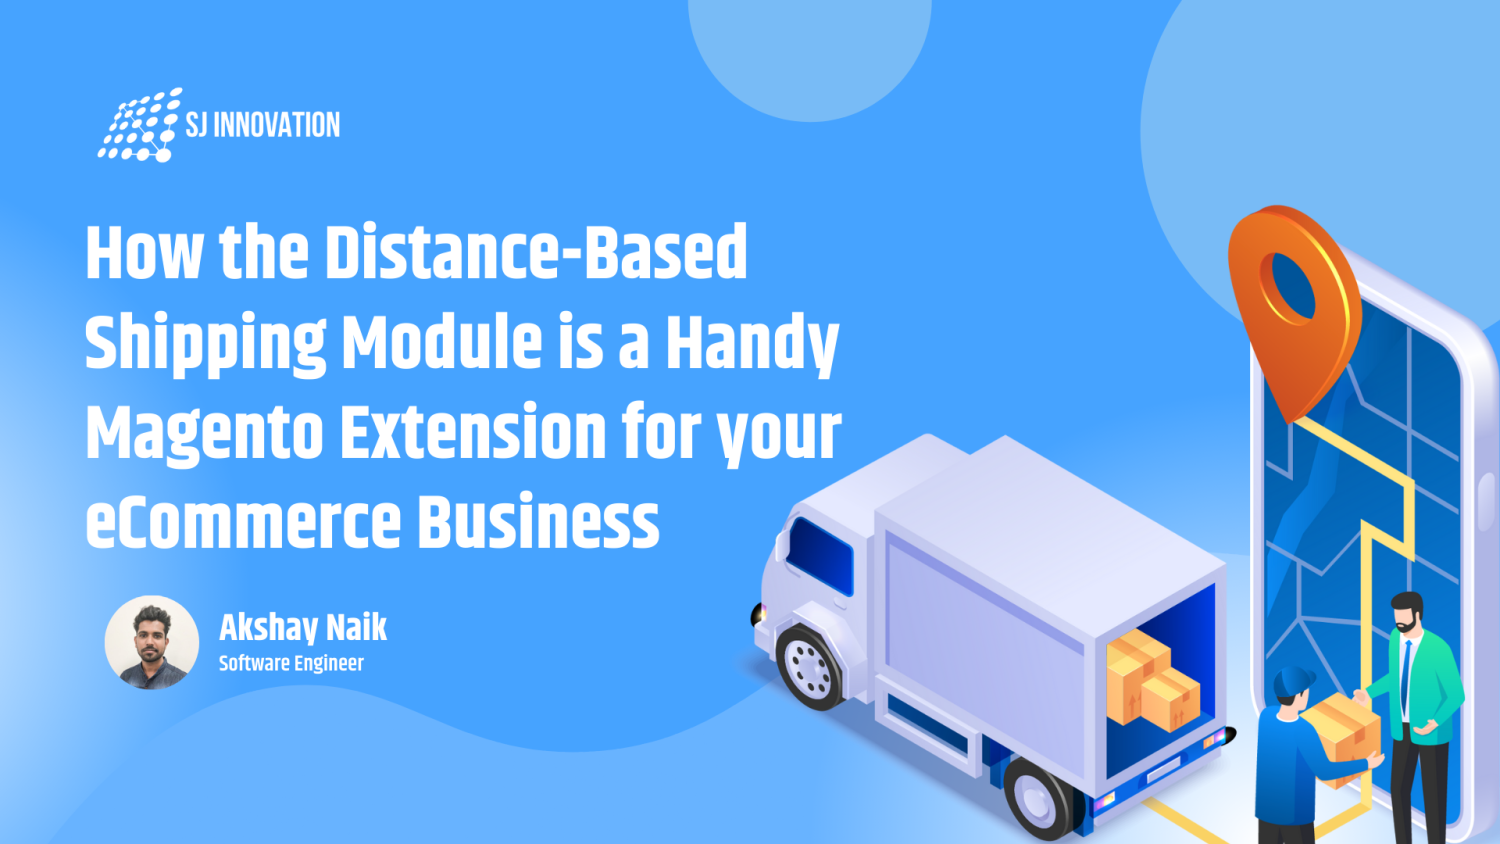 How the Distance-Based Shipping Module is a Handy Magento Extension for your eCommerce Business